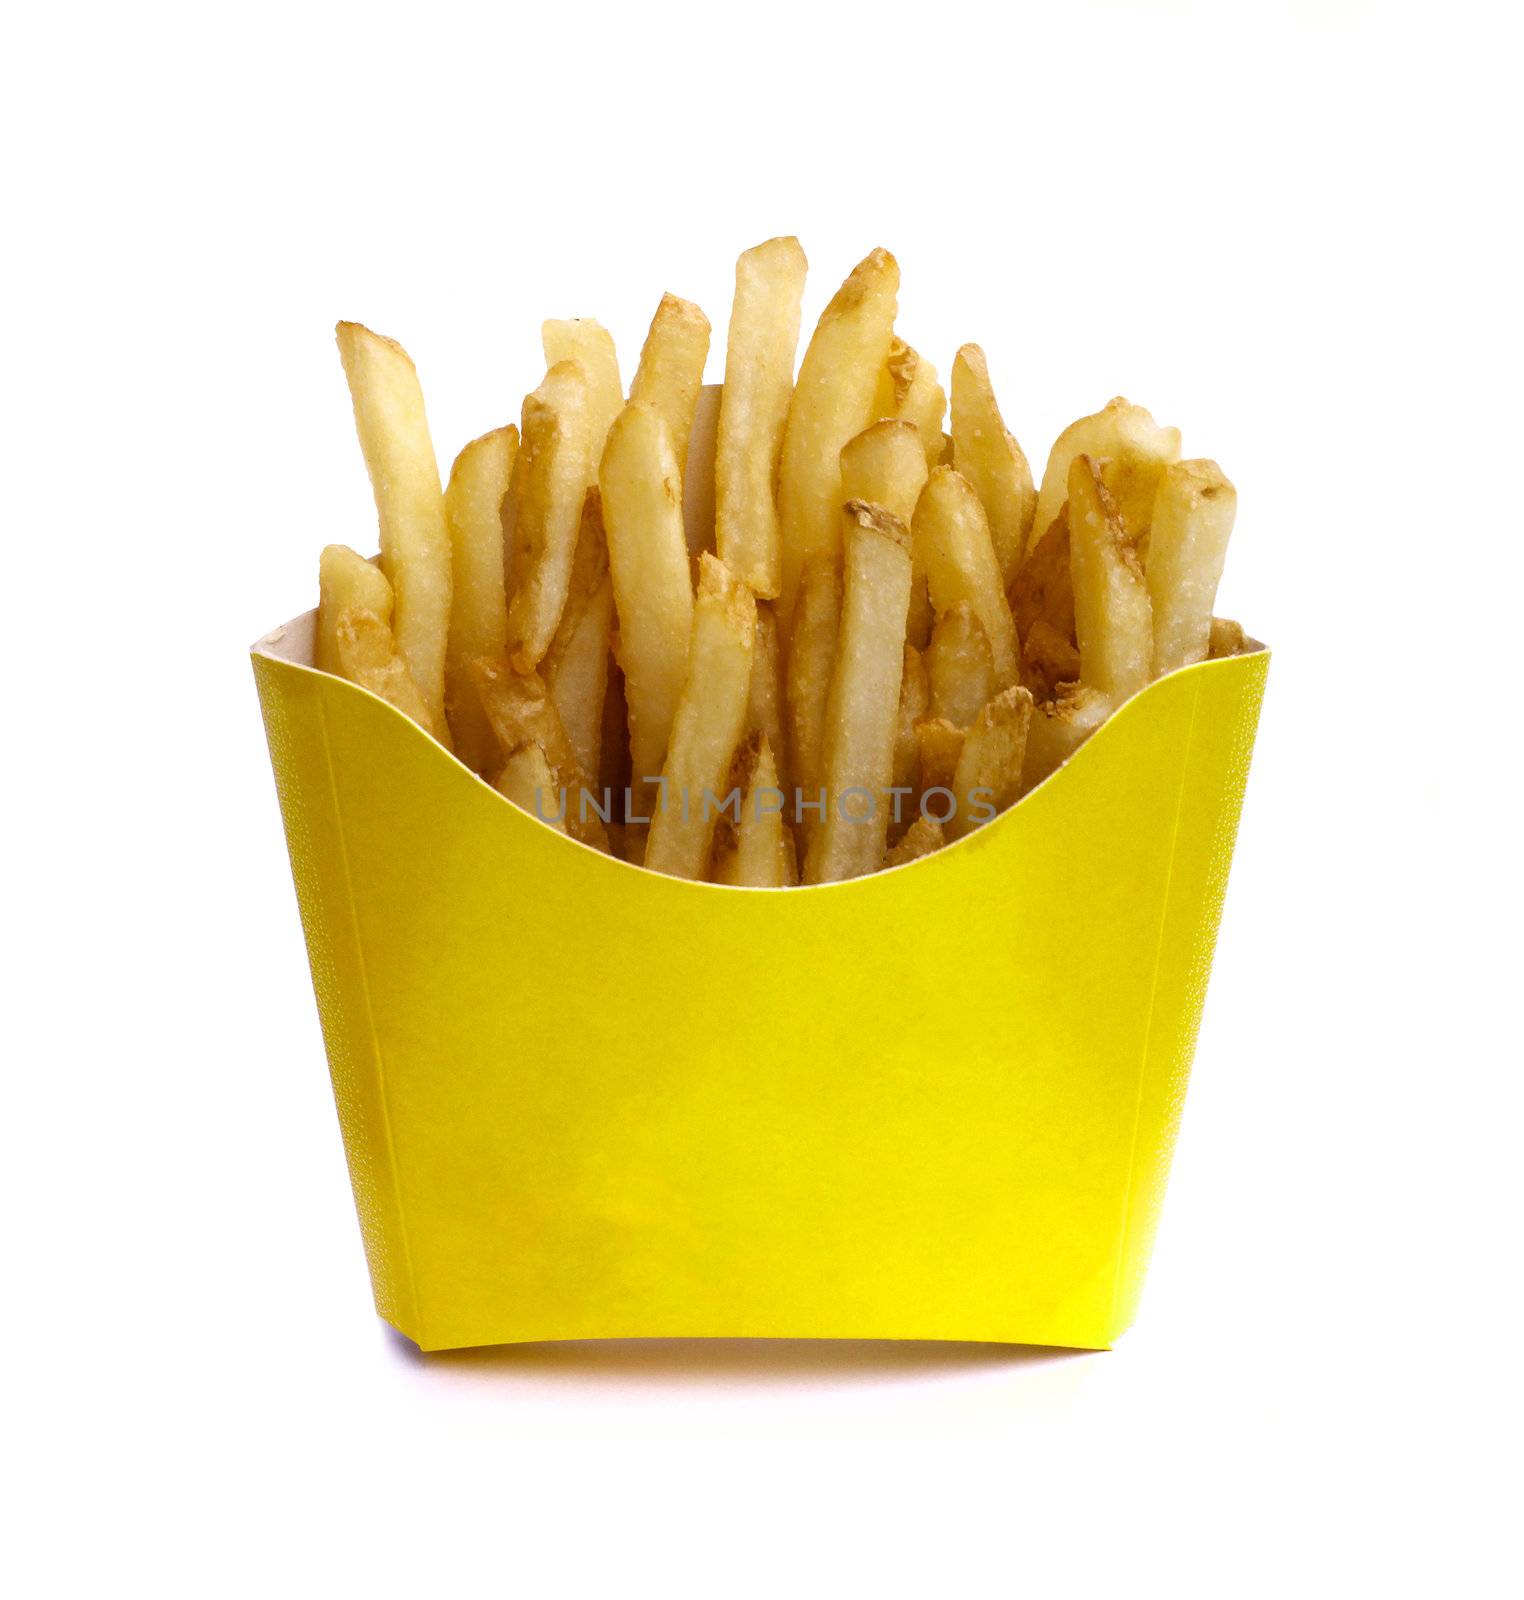 French fry in yellow box isolated on white nackground